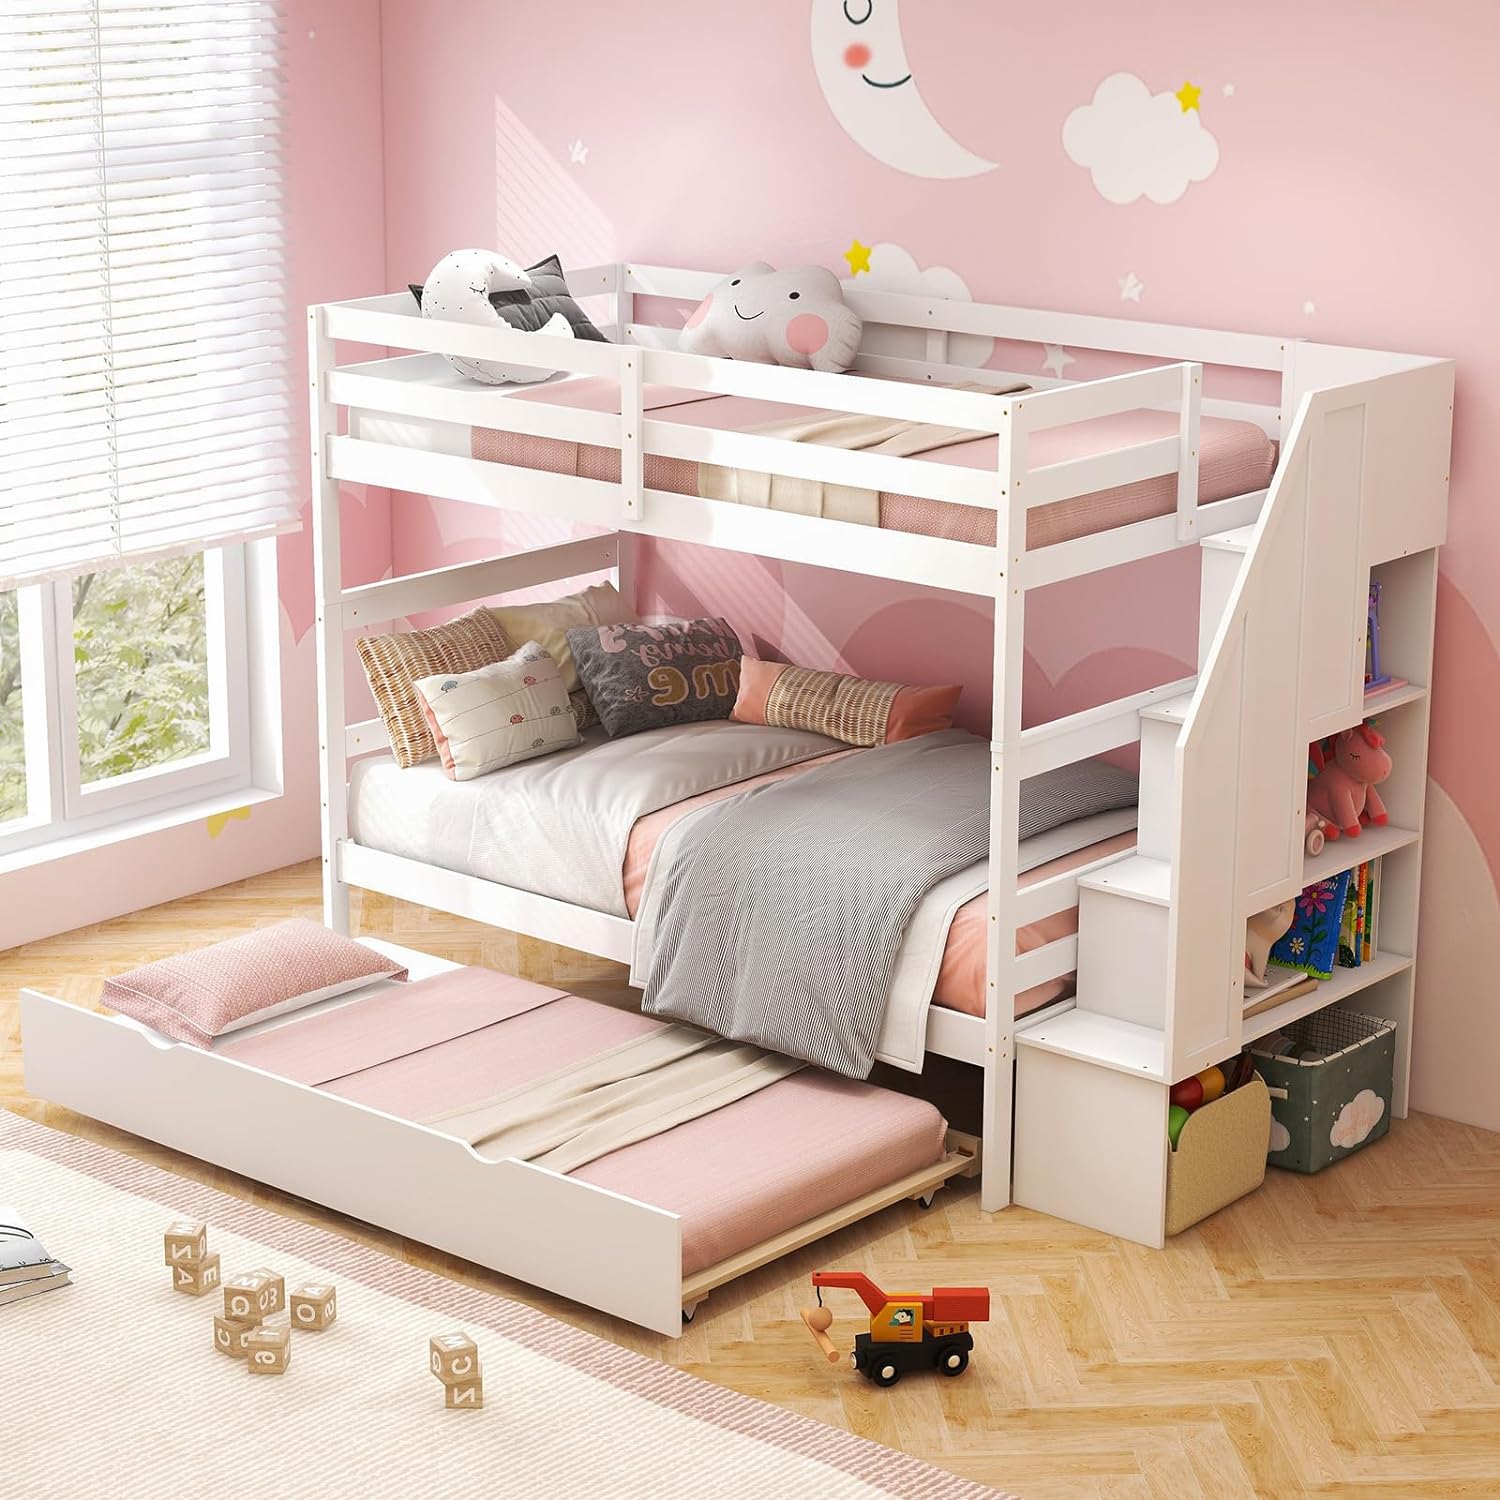 Giantex Twin Over Twin Bunk Bed with Trundle and Storage Stairs, Solid Wood Bunk Bed Convertible 3 Bed Frames for Bedroom